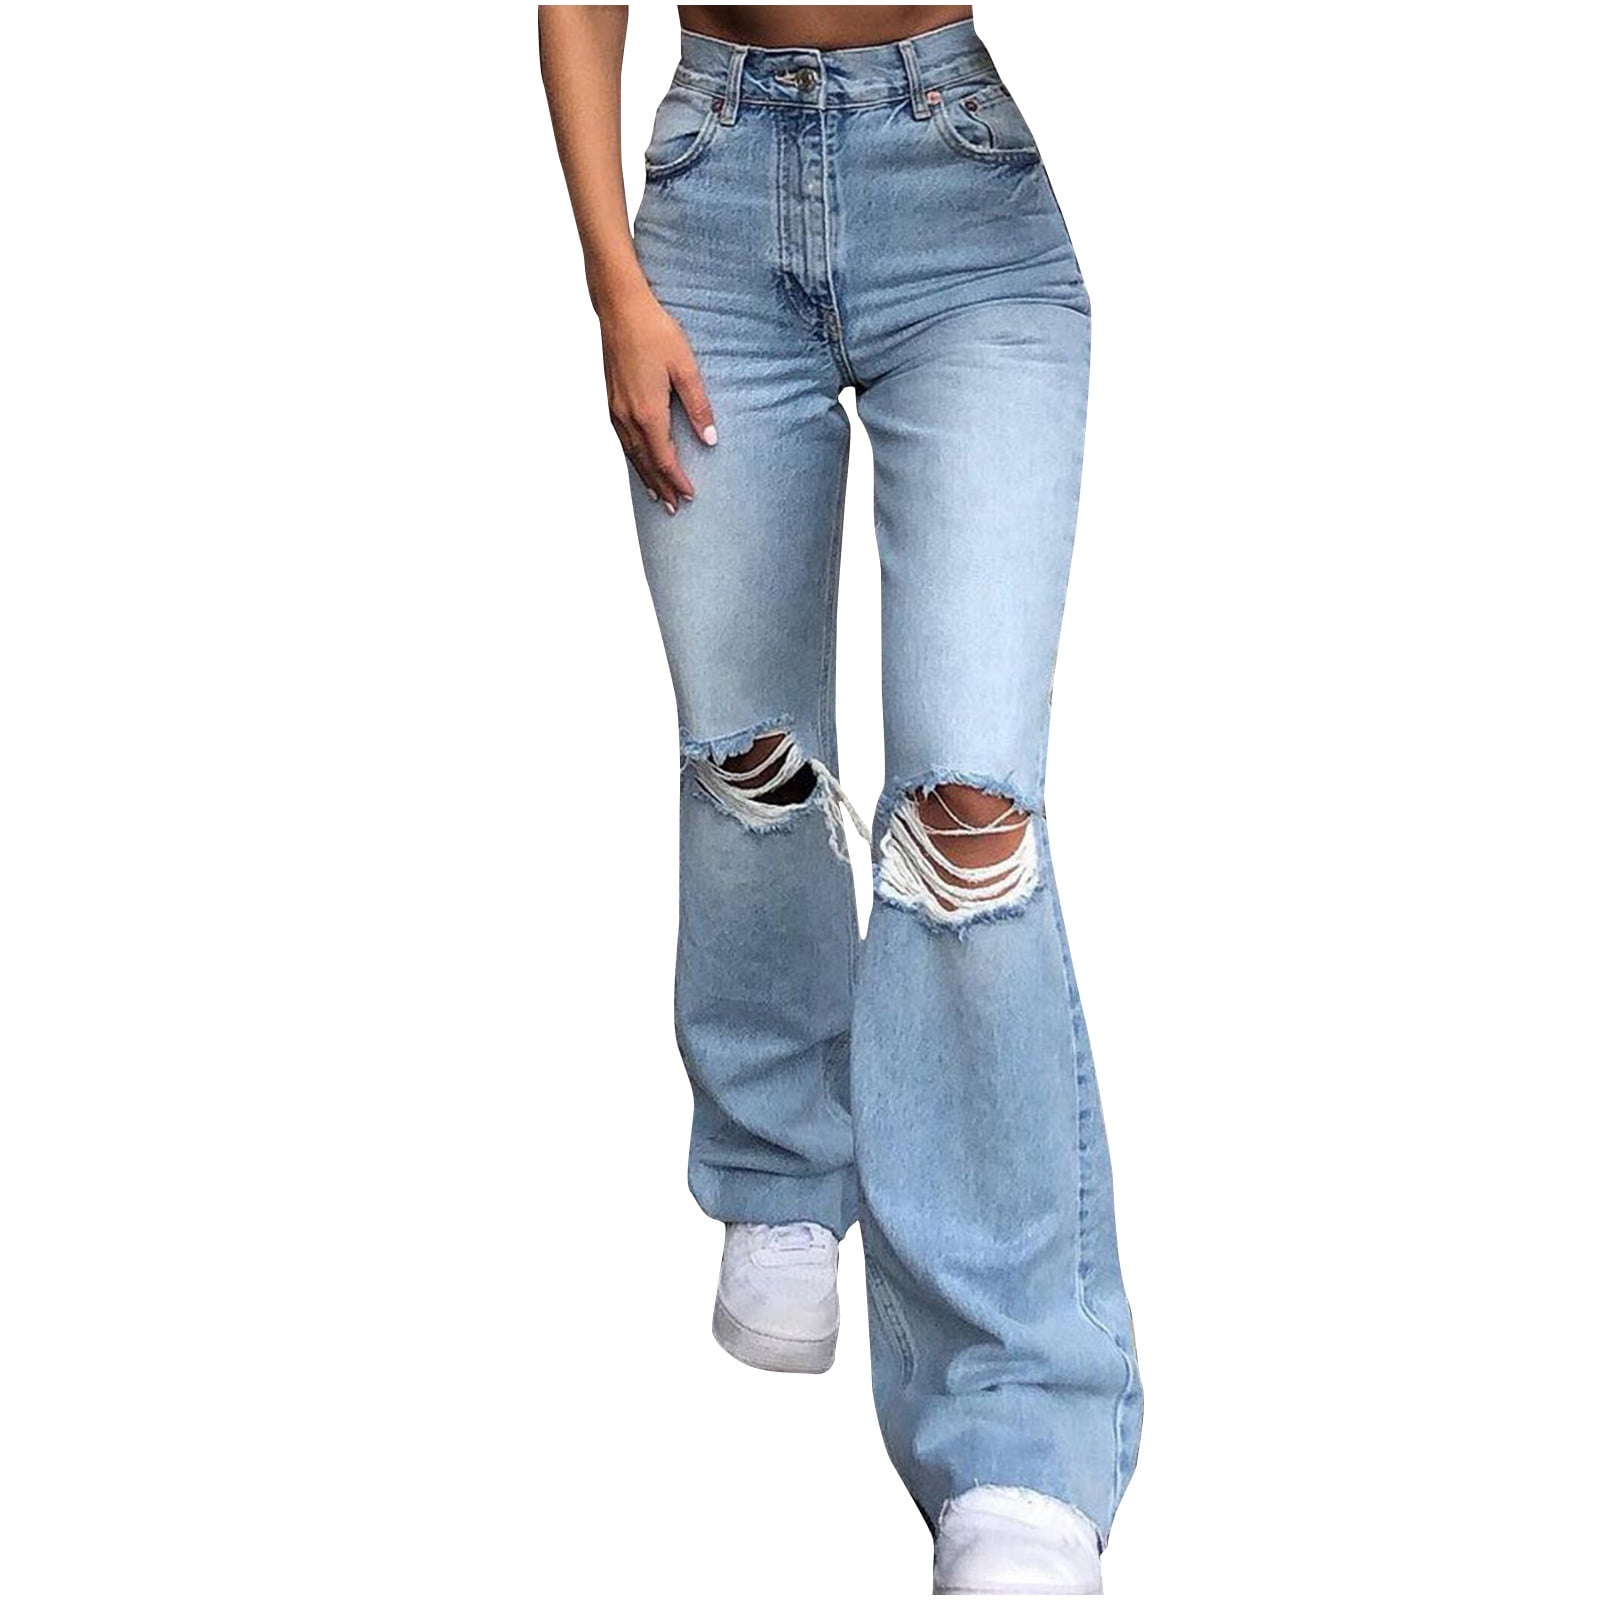 Hfyihgf Women's Ripped Flare Jeans Distressed Bootcut Jeans